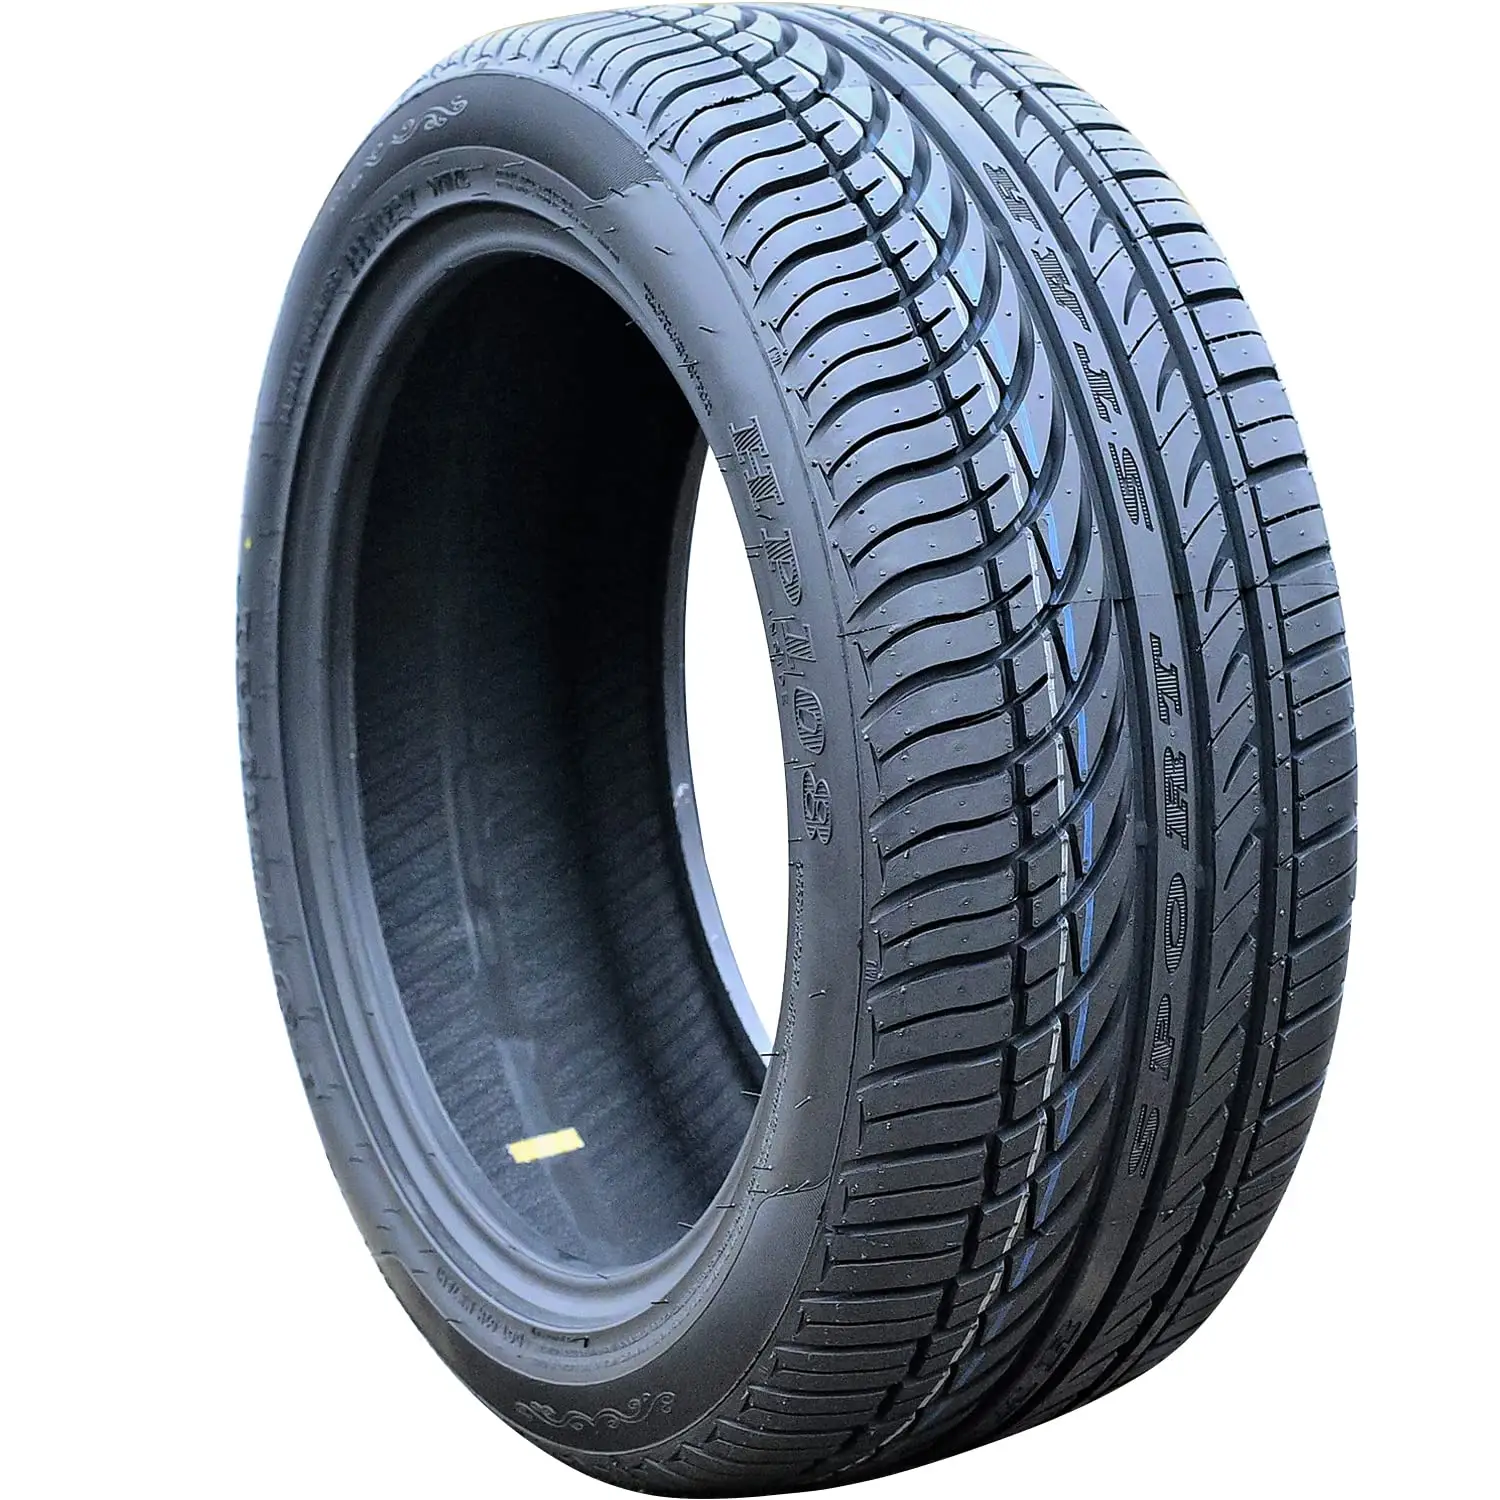 Second Hand truck Tires / Perfect Used Car Tires In Bulk With Competitive At Wholesale Price